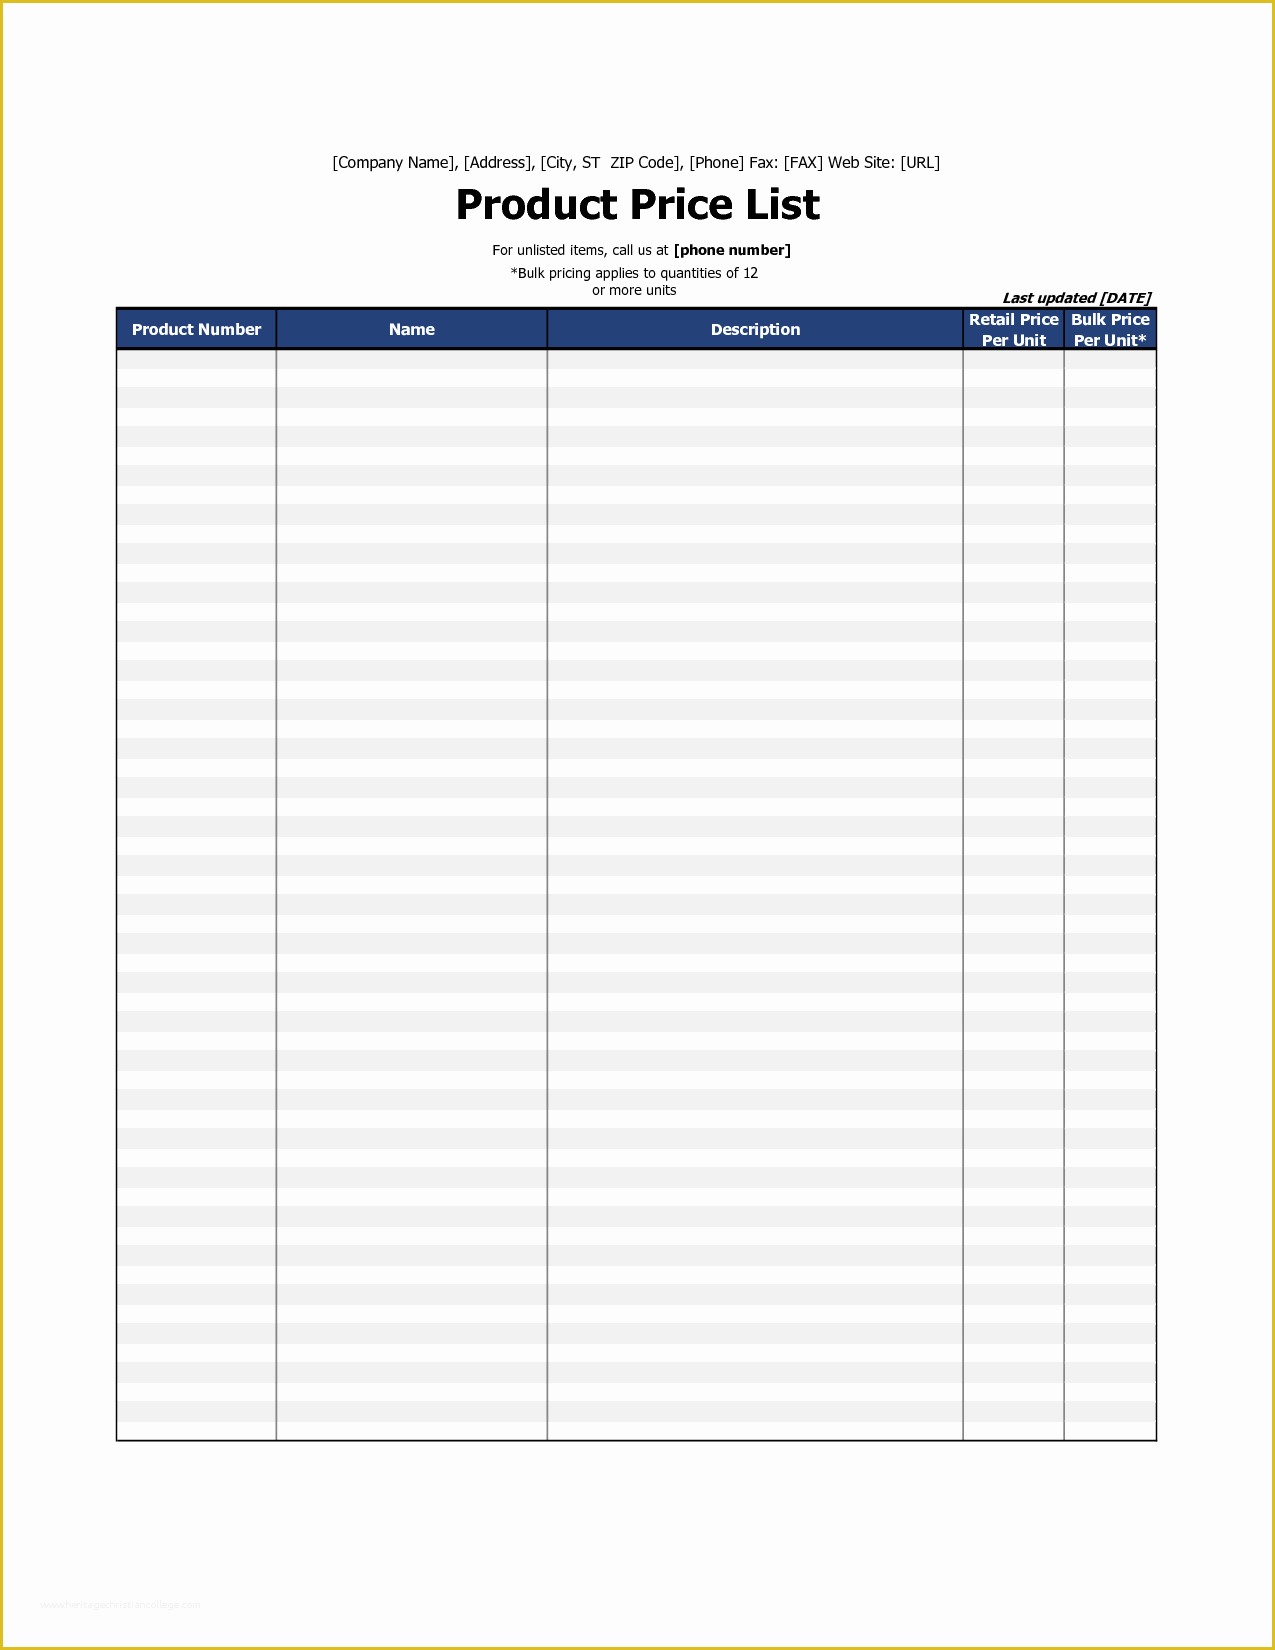 Price List Template Free Of Excel Price List Template Portablegasgrillweber